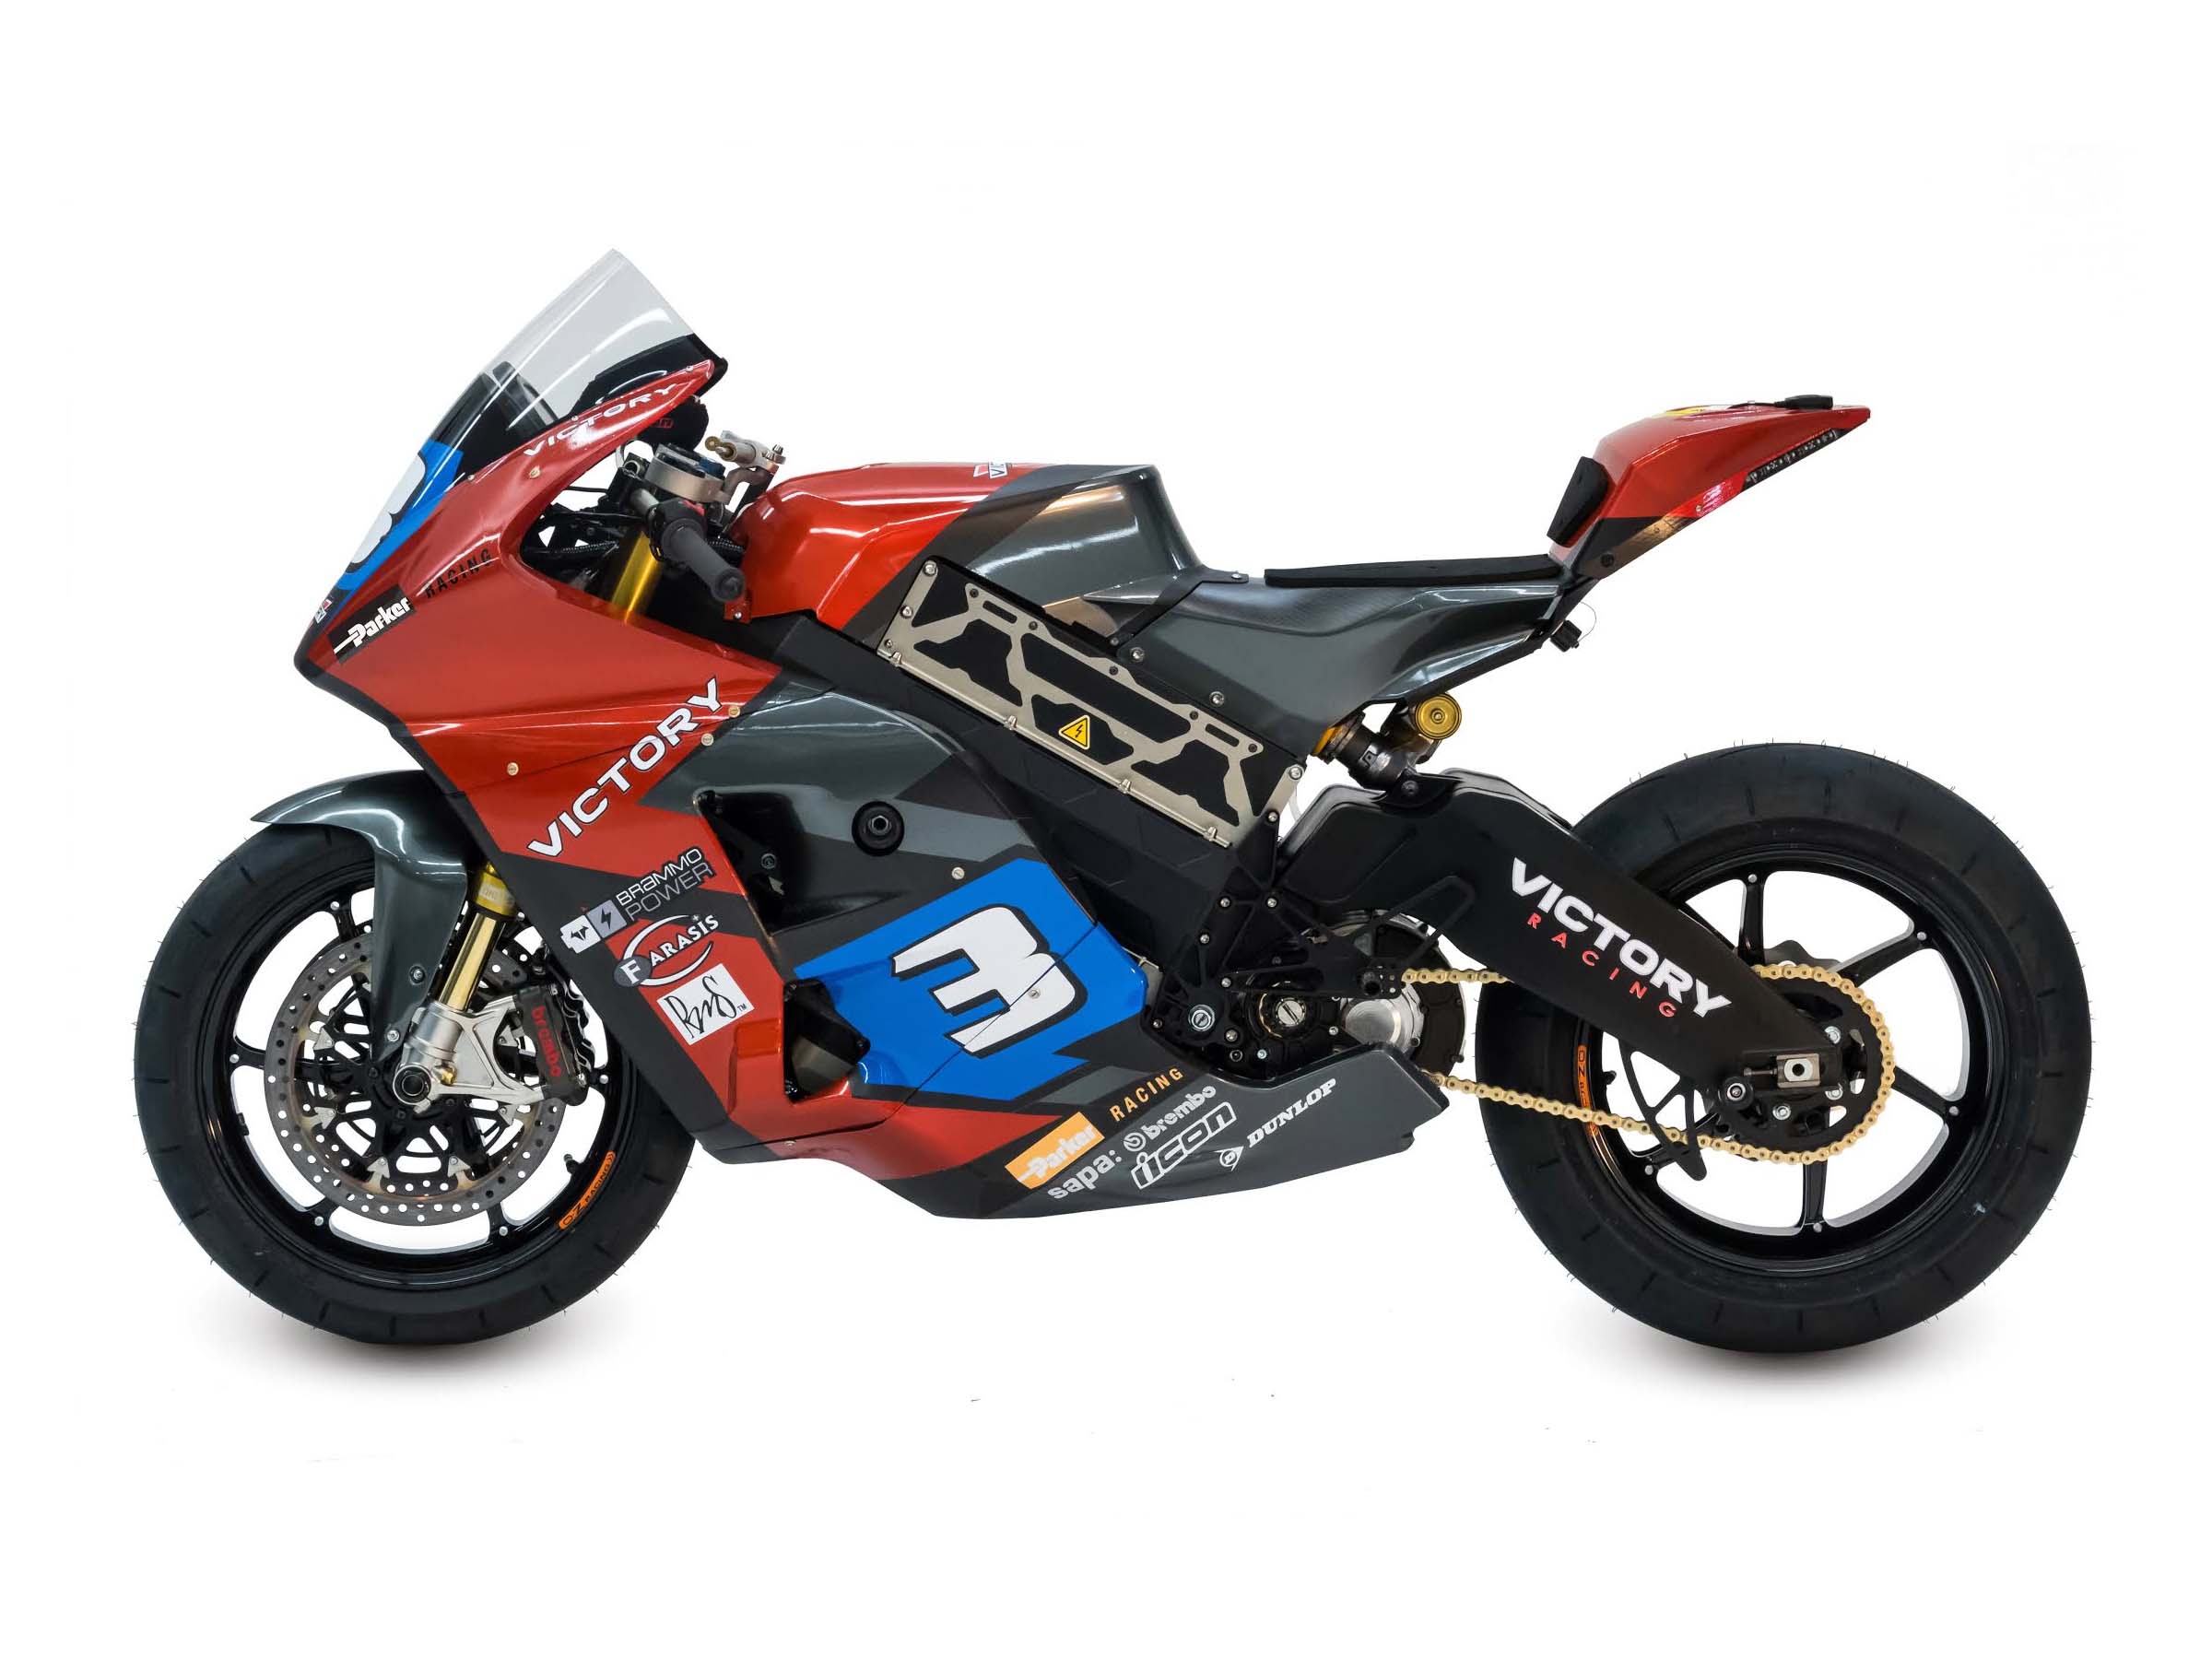 Details on the Victory's Electric Race Bike for the IOMTT - Asphalt